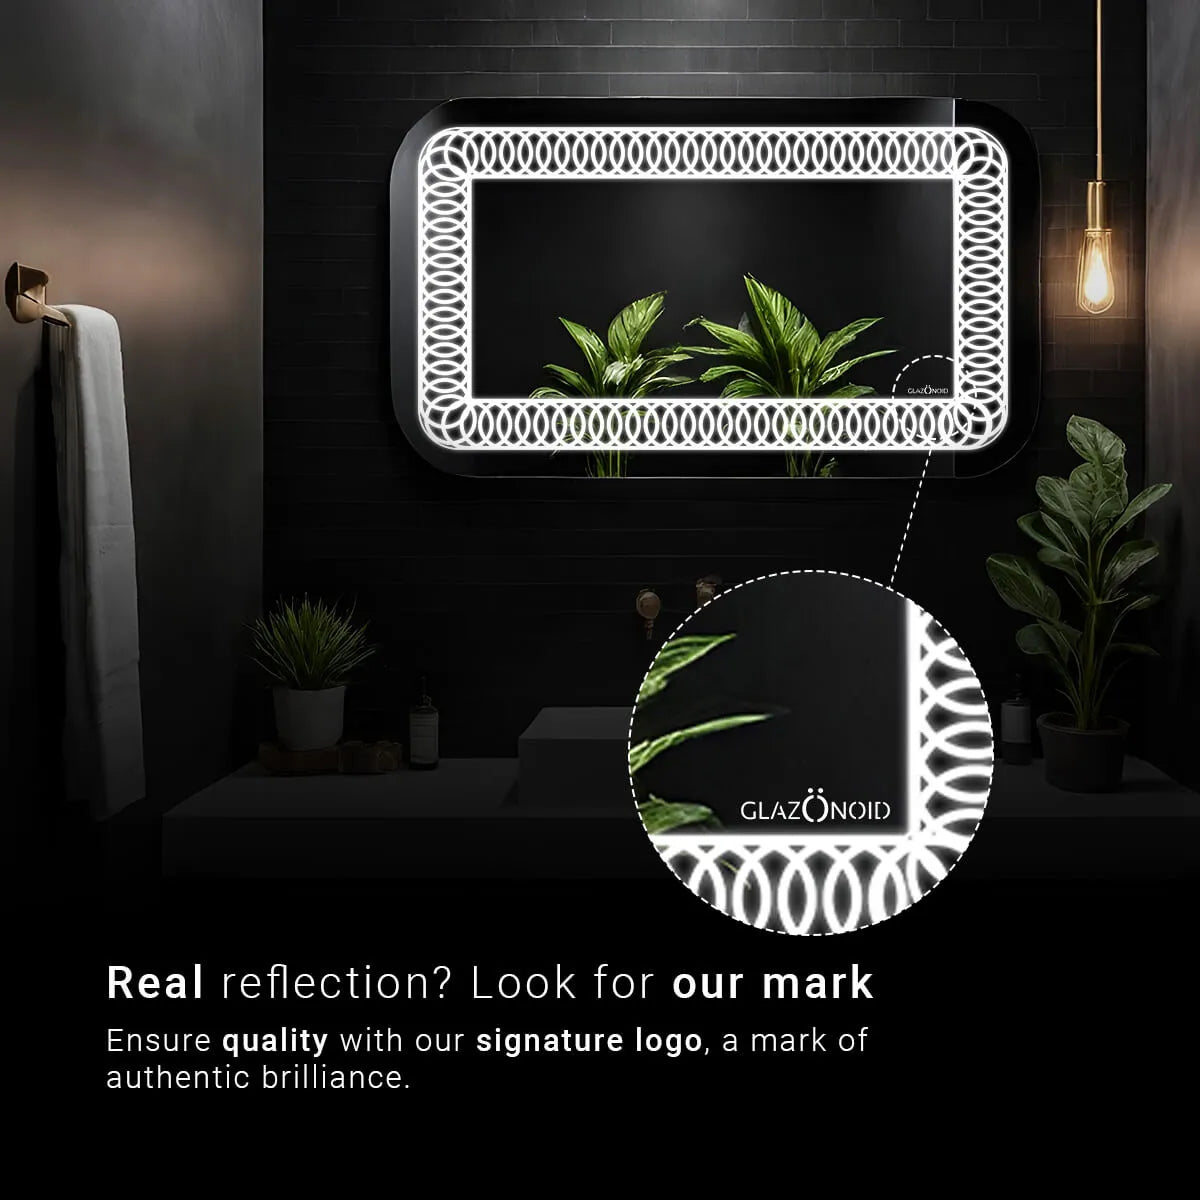 Rectangular bathroom LED mirror with a green plant on a built-in shelf, adding a touch of nature to your bathroom.  Text in the image says "Glazonoid: Real reflection? Look for our mark. Ensure quality with our signature logo, a mark of authentic brilliance."